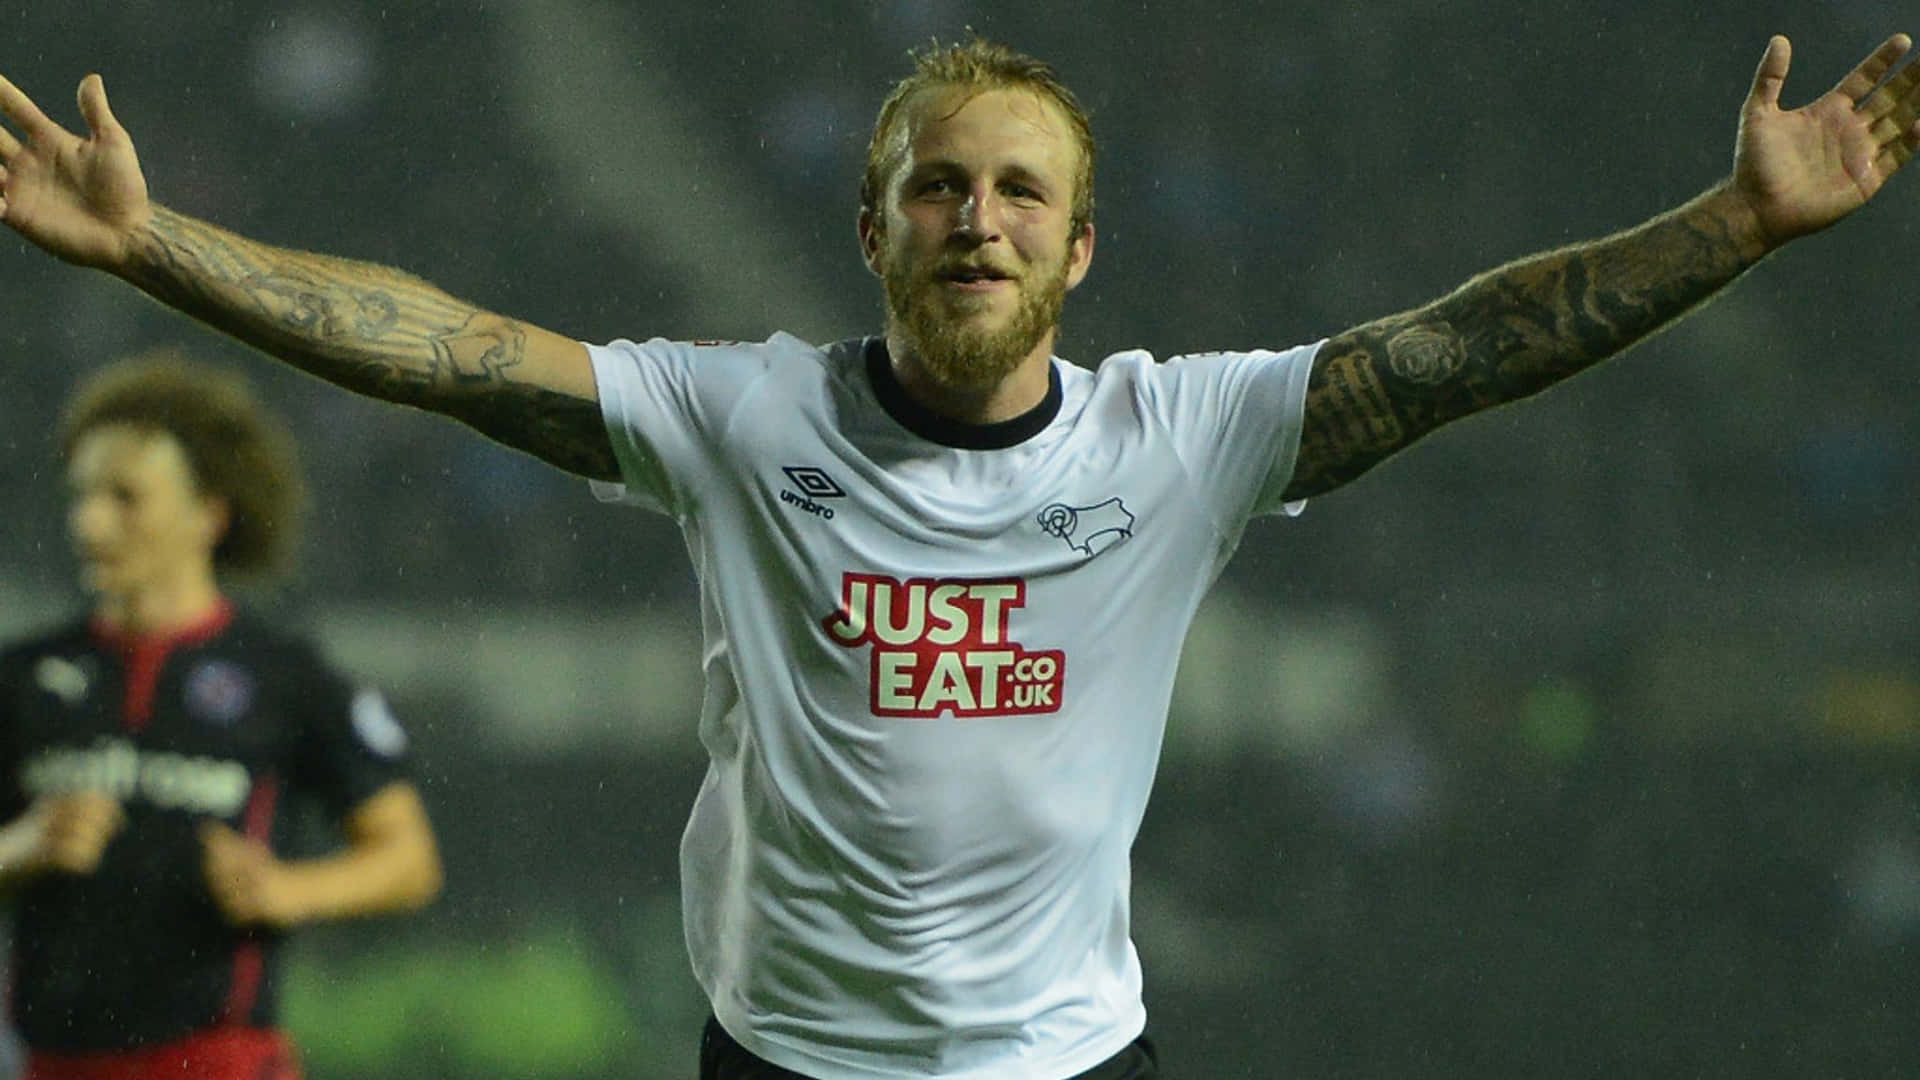 Scottish Professional Football Player Johnny Russell On Field Wallpaper